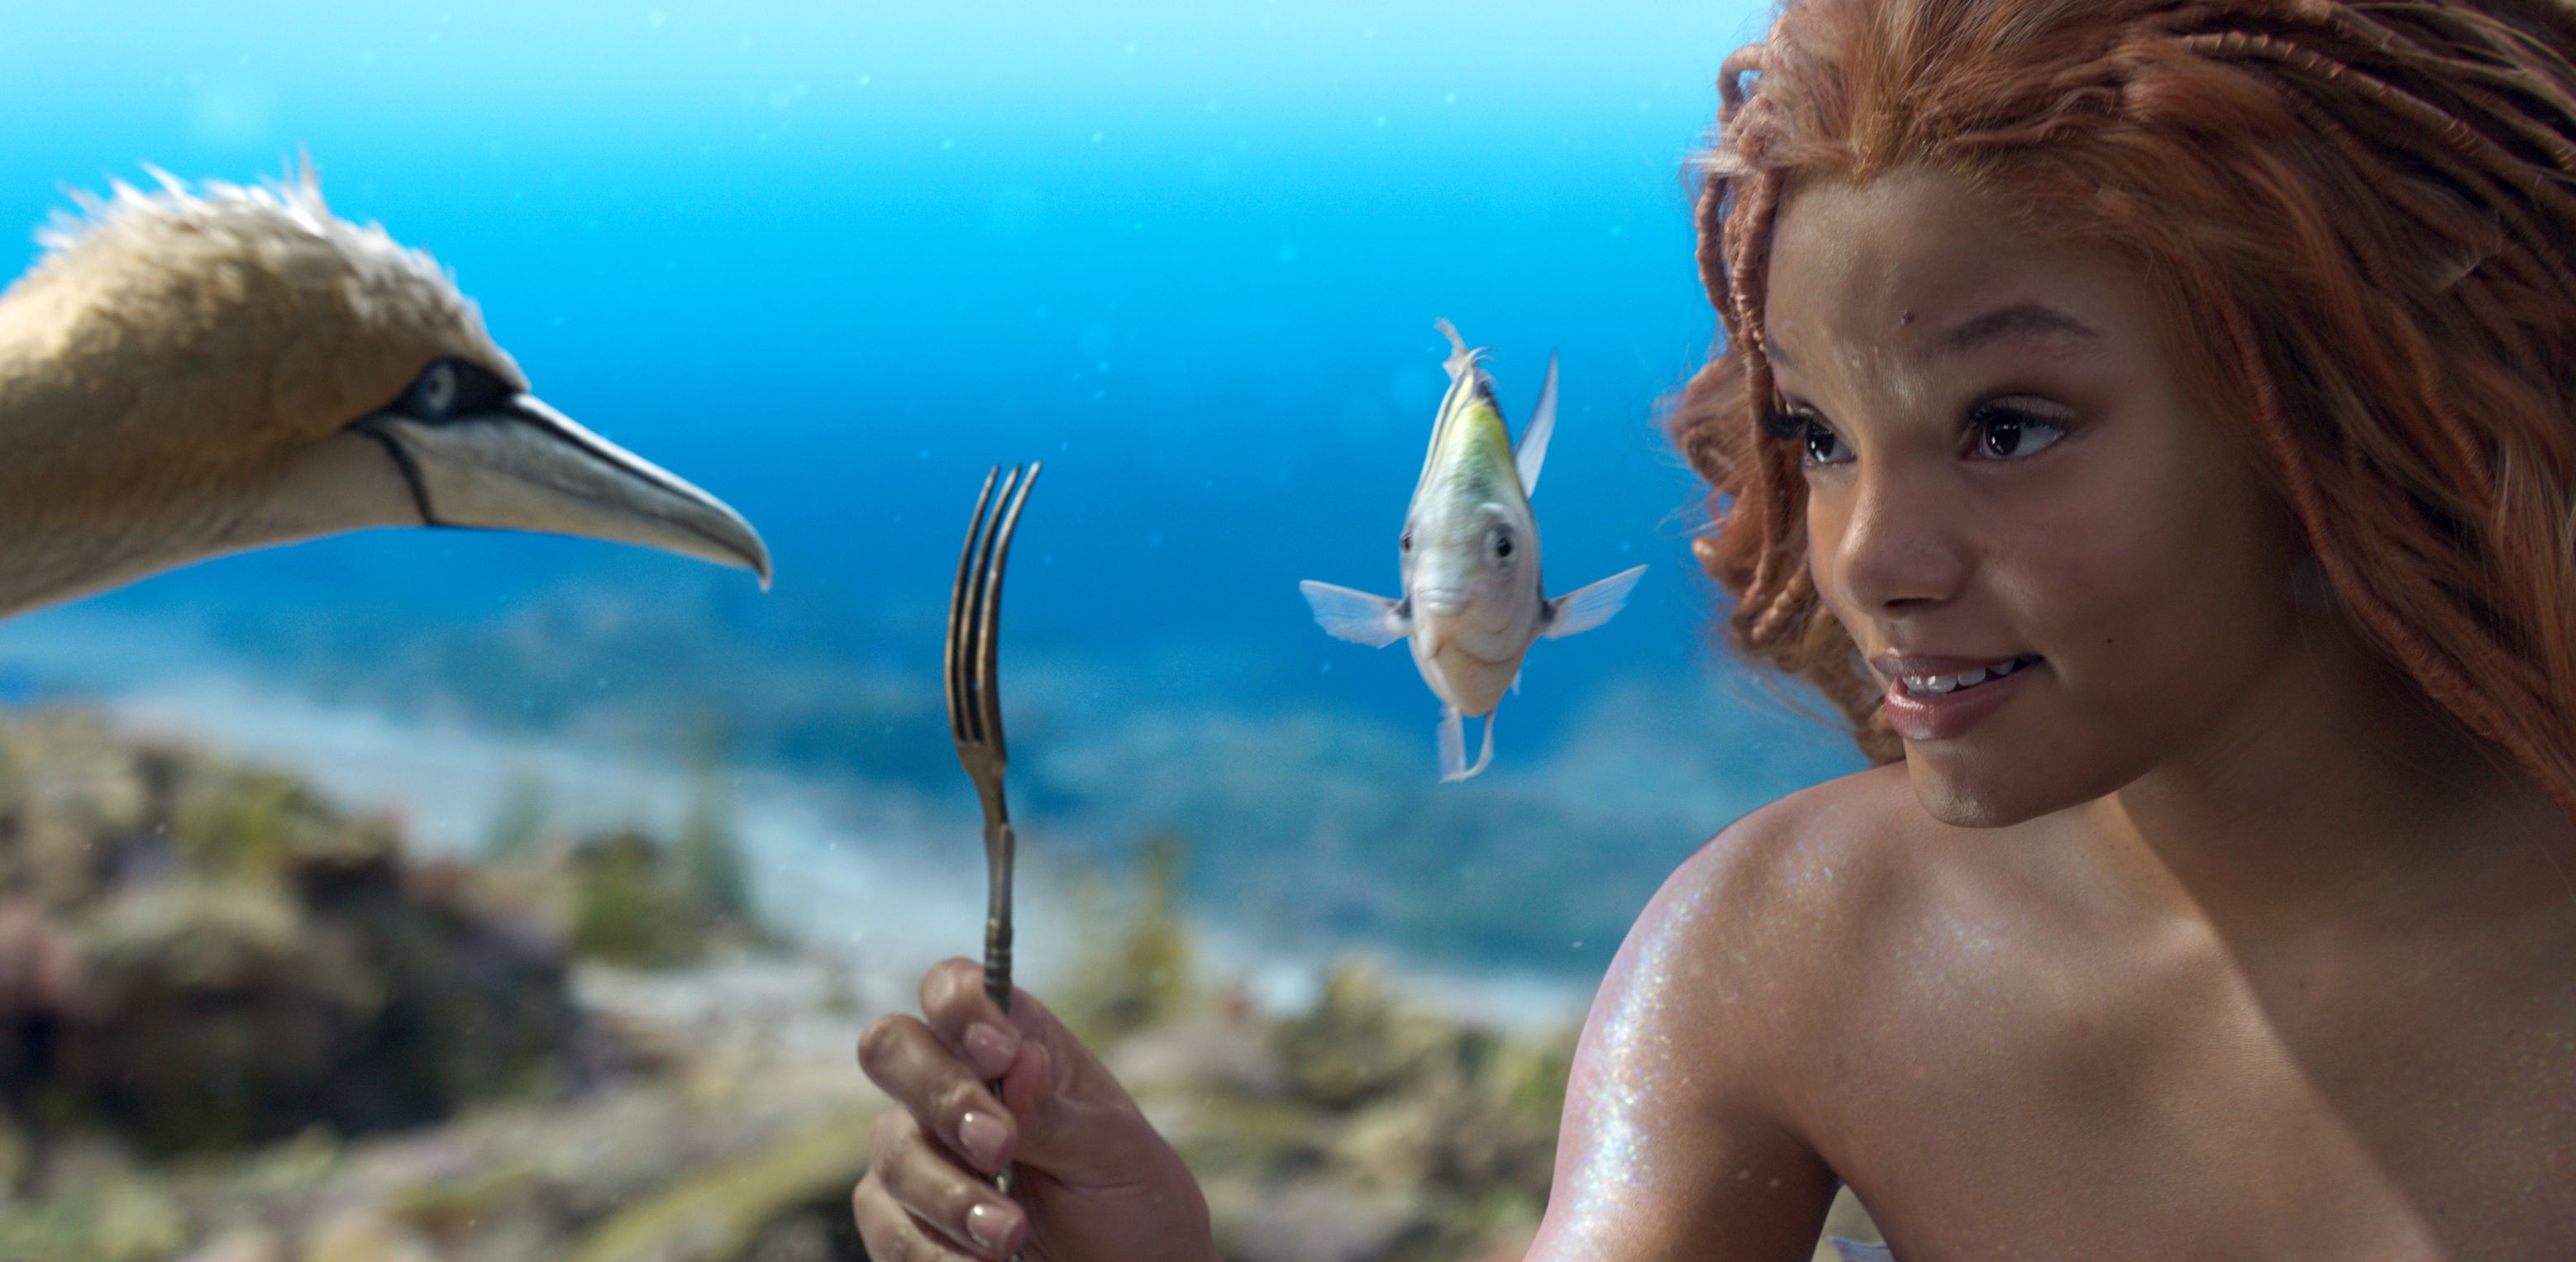 Is The Little Mermaid Streaming? How to Watch The Little Mermaid